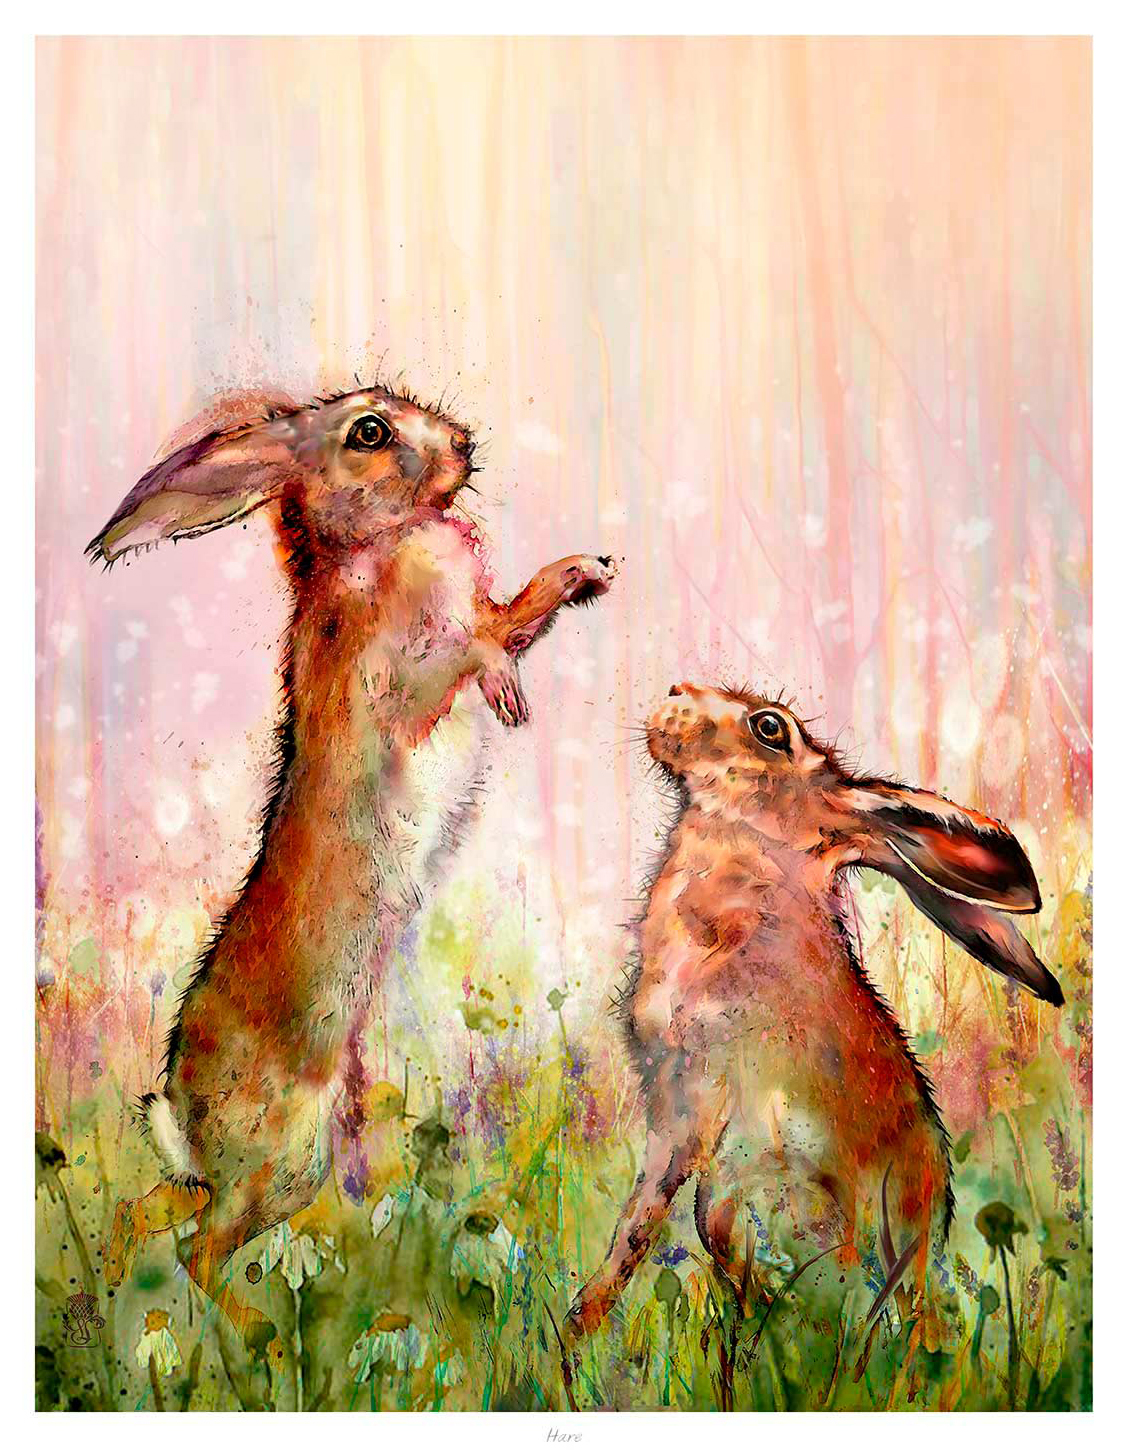 The image depicts two whimsical, human-like rabbits standing upright amongst colorful brush strokes suggesting a vibrant, abstract forest background. By Lee Scammacca